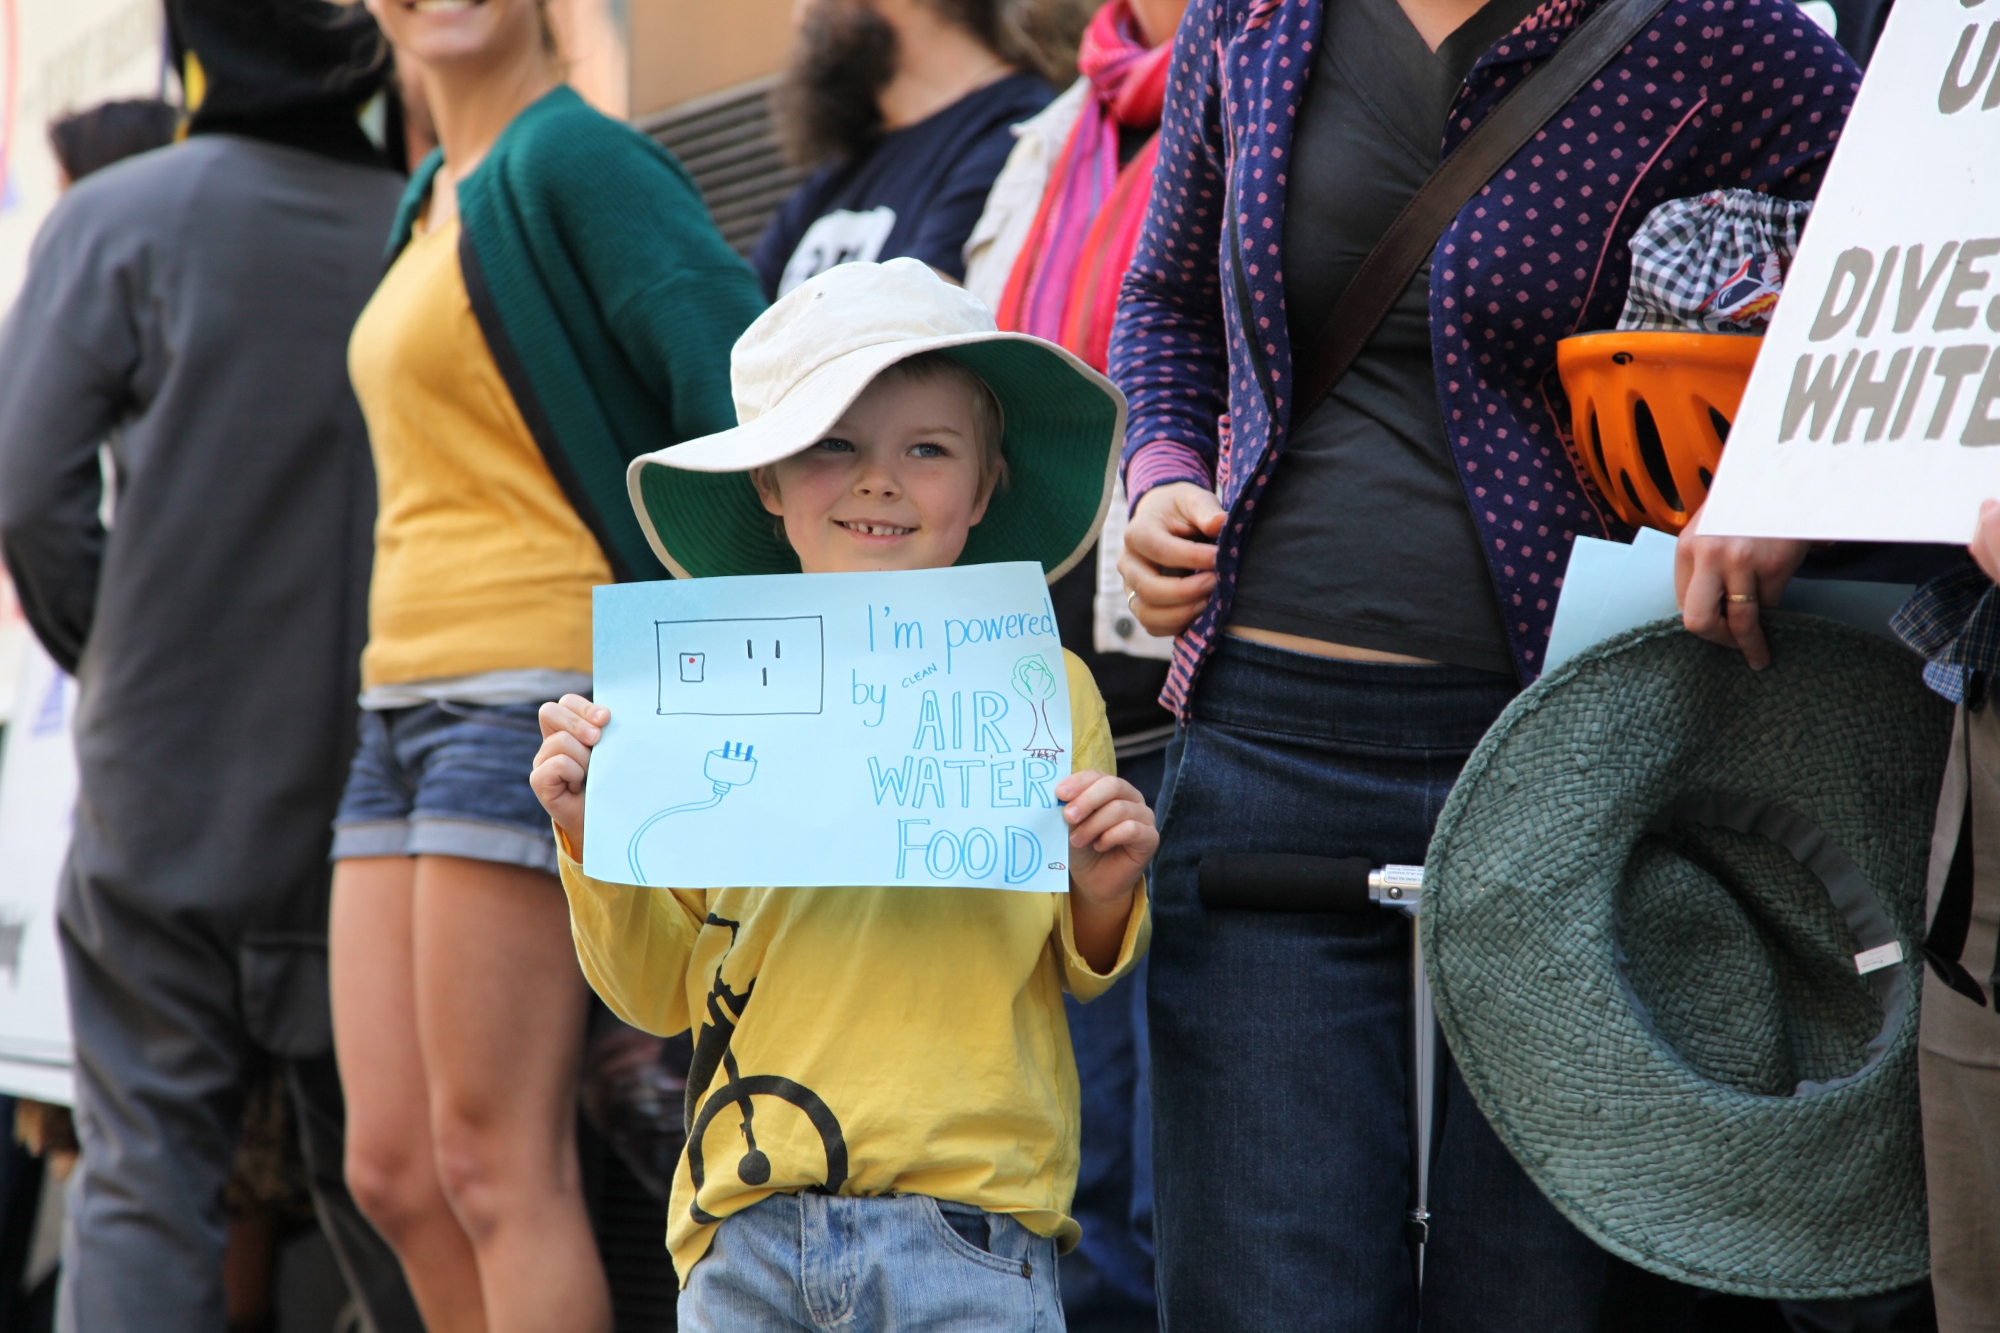 a young child is holding a sign and wearing a cowboy hat